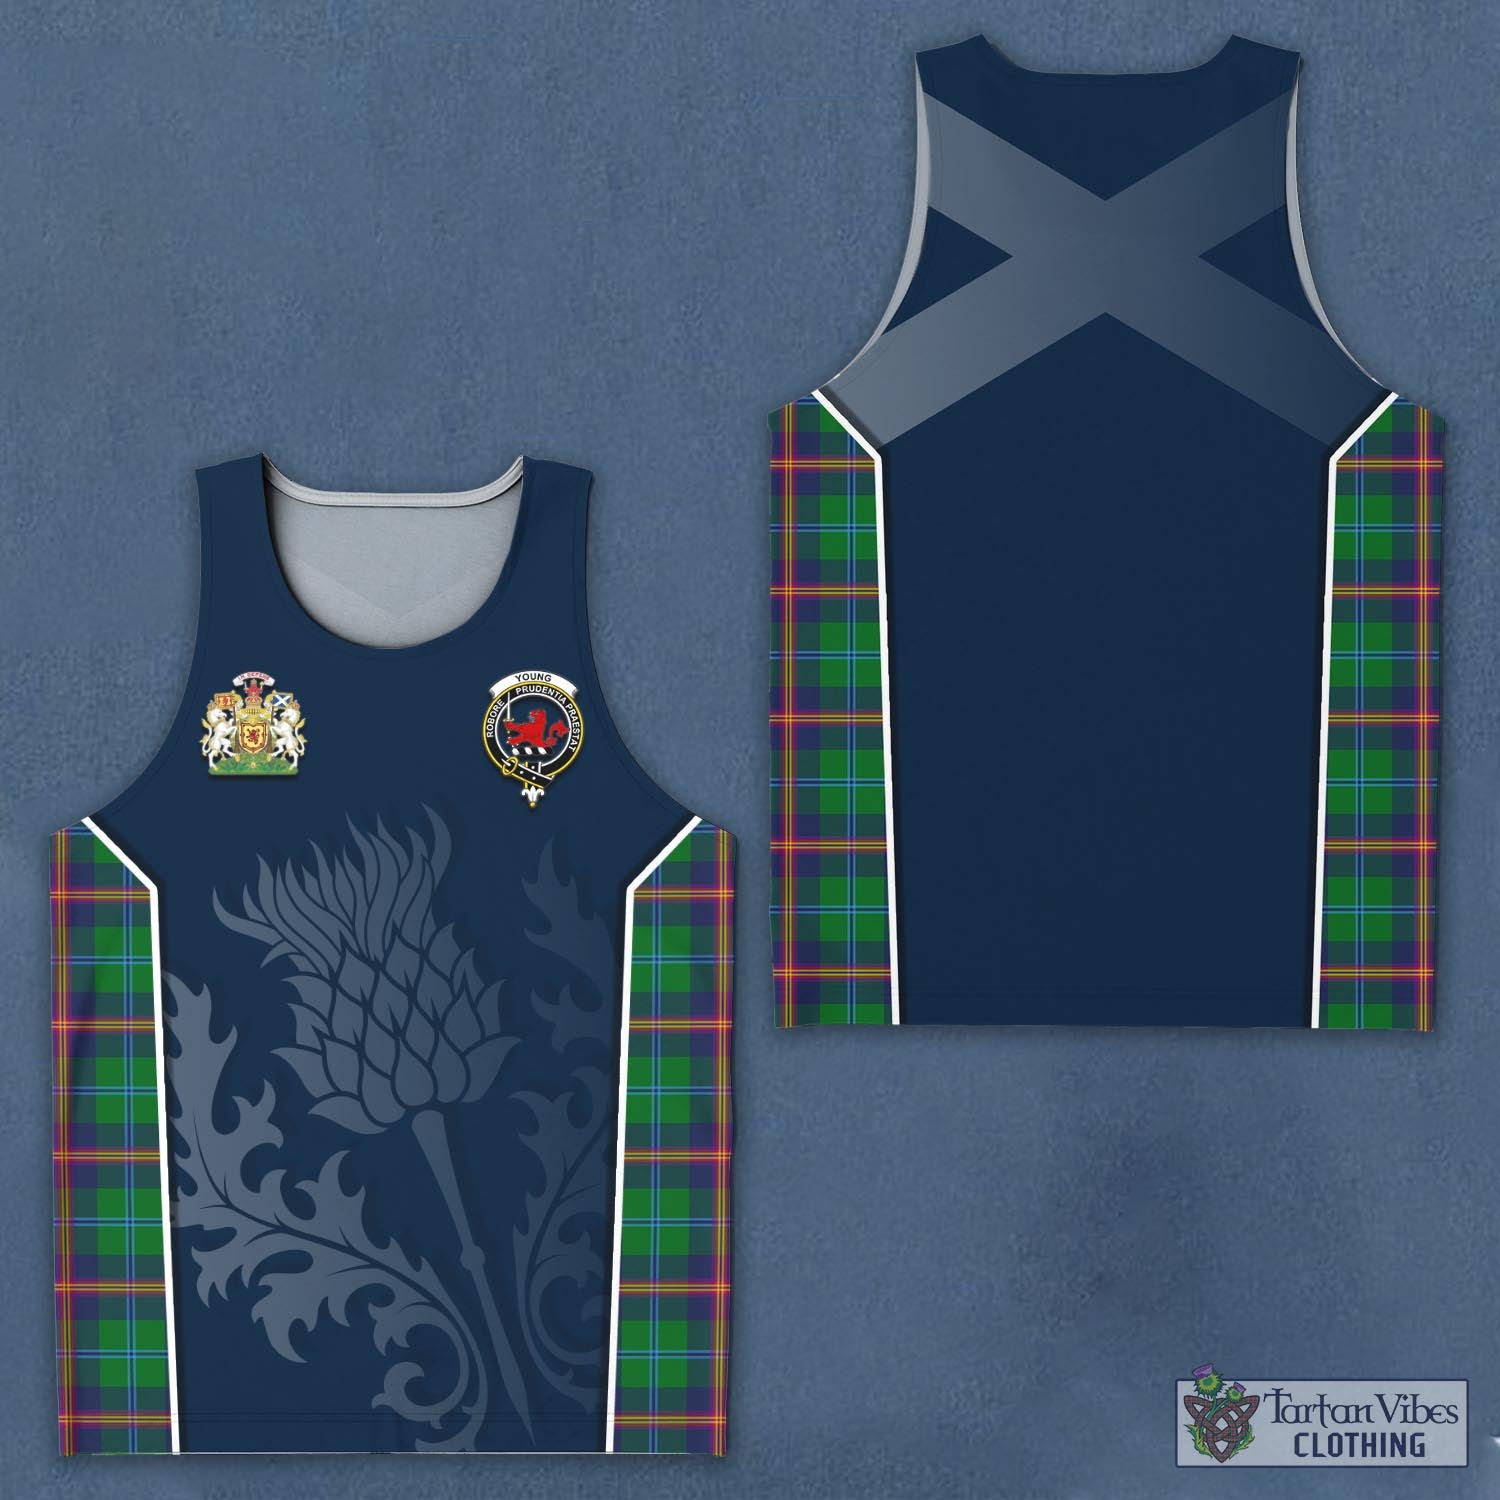 Tartan Vibes Clothing Young Modern Tartan Men's Tanks Top with Family Crest and Scottish Thistle Vibes Sport Style